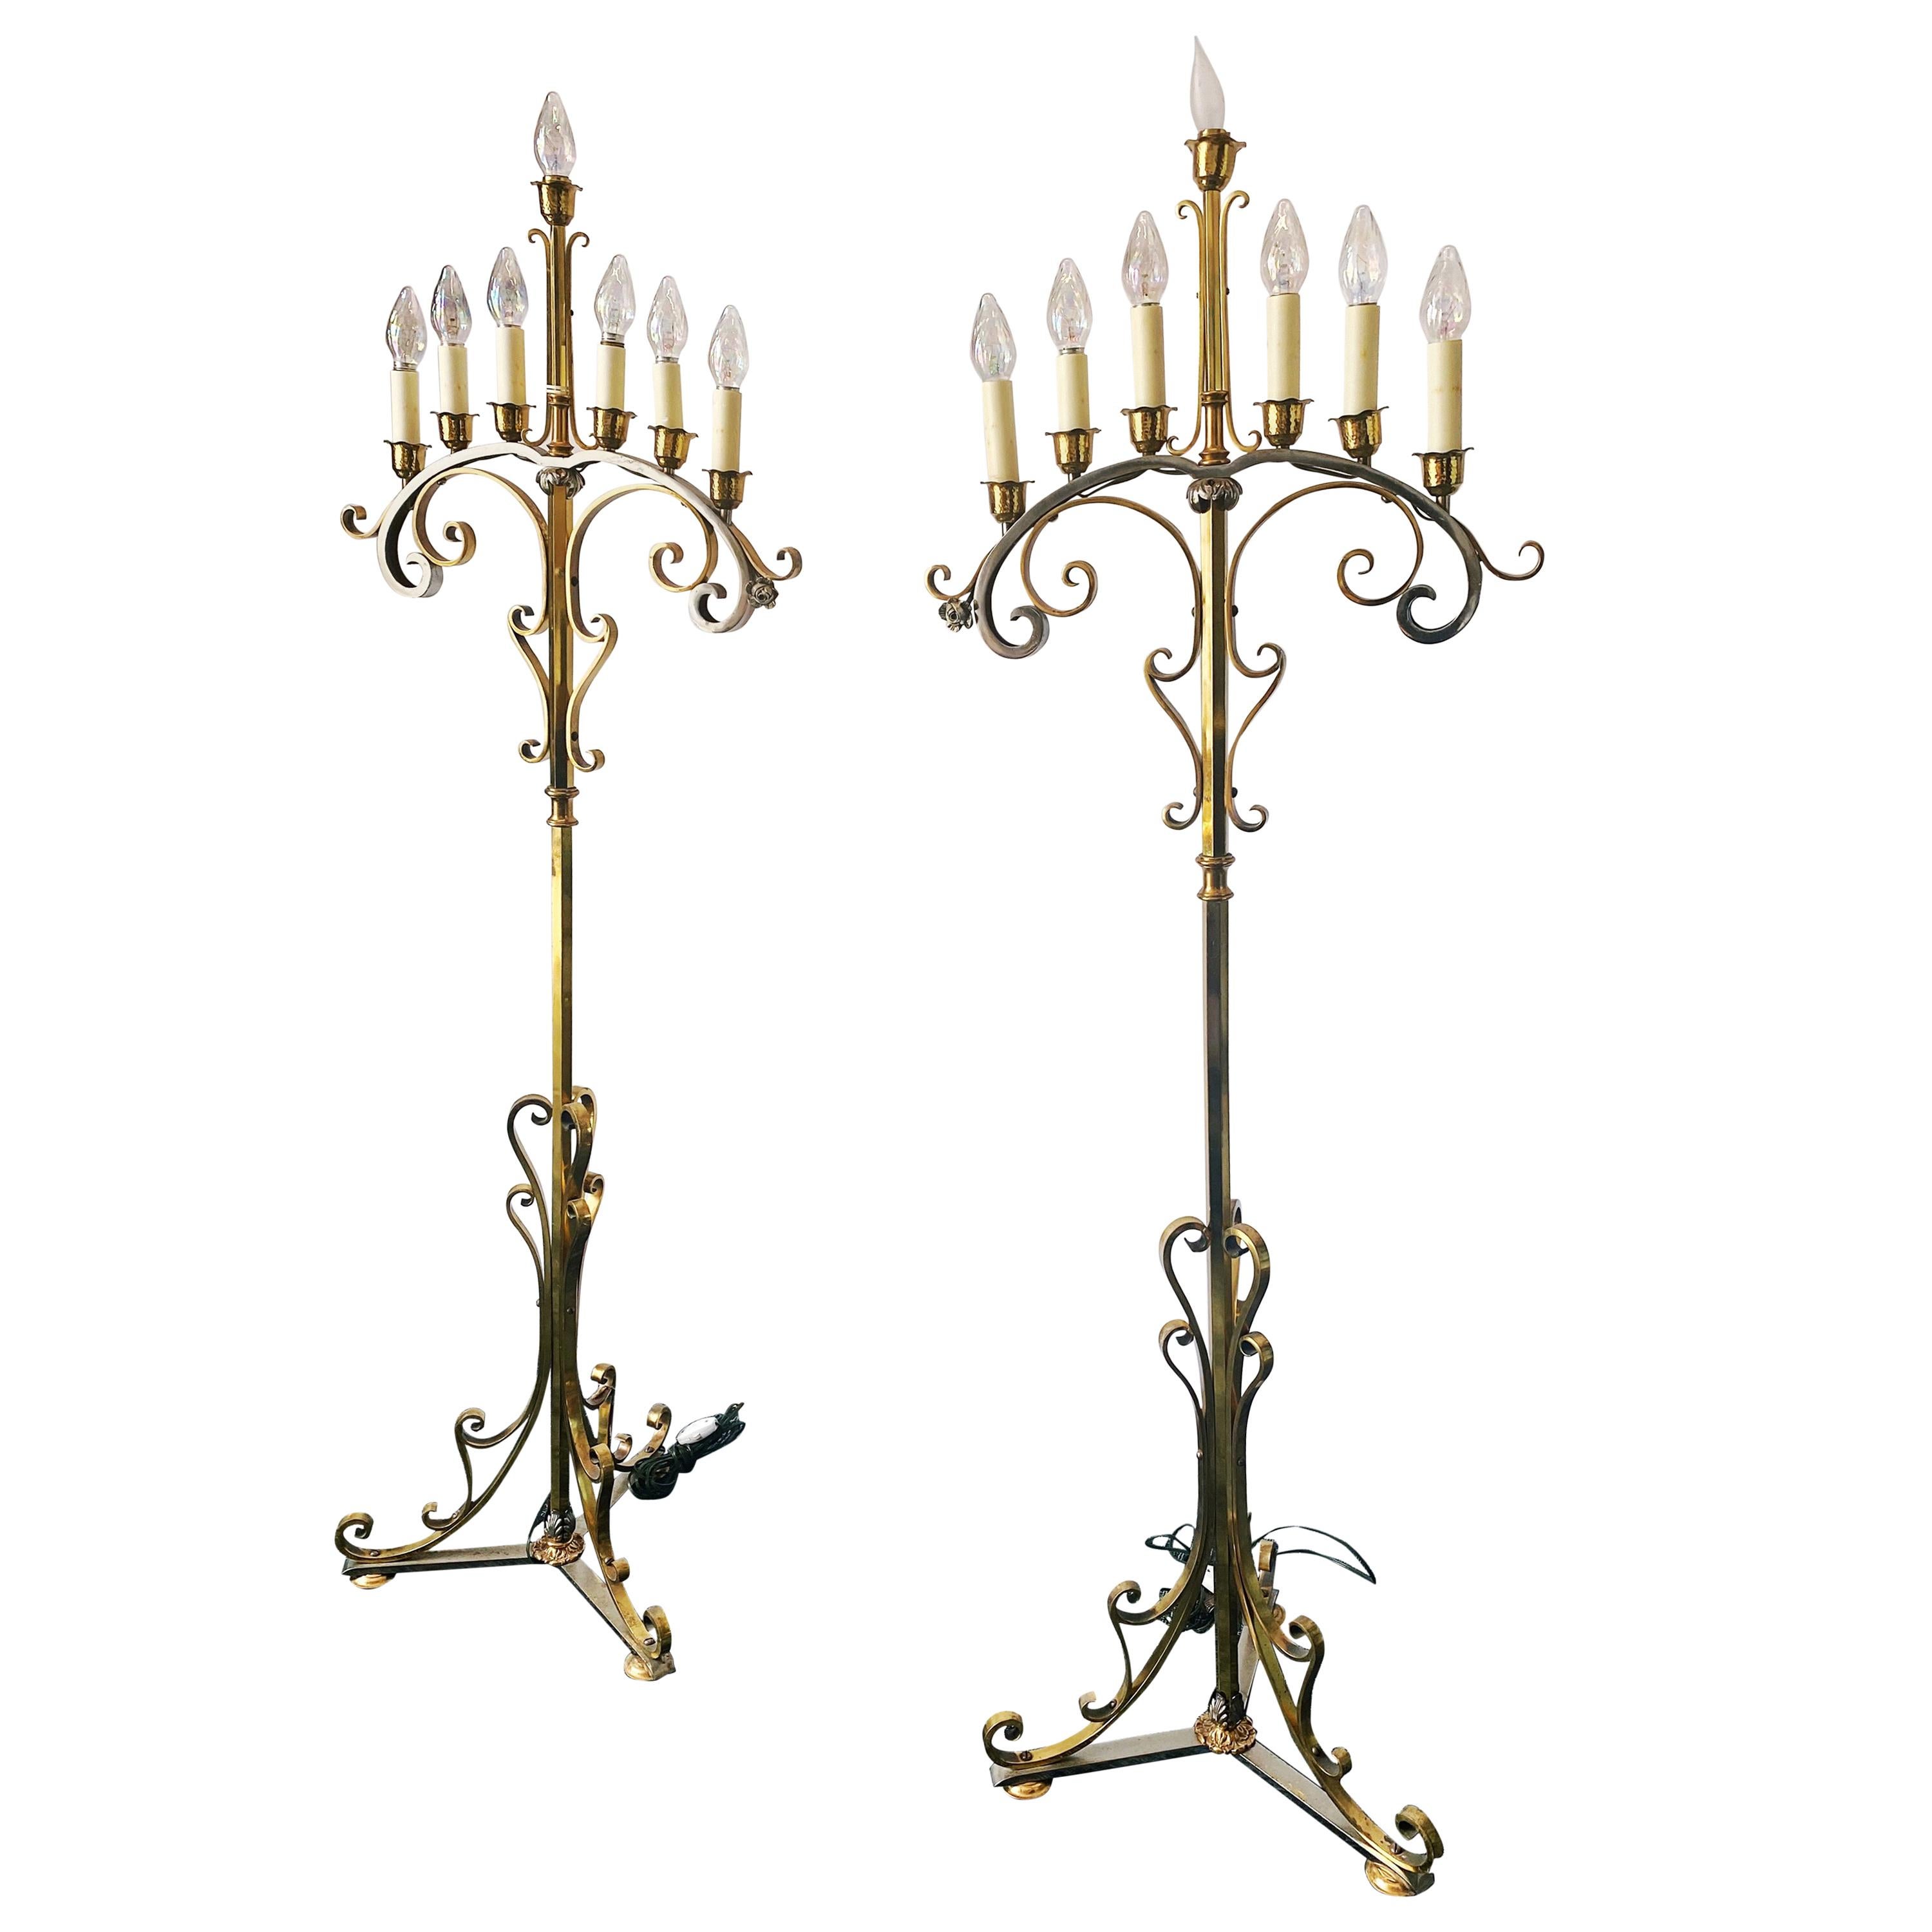 Vintage Pair of Brass and Chrome Candelabra Floor Lamps, circa 1950s